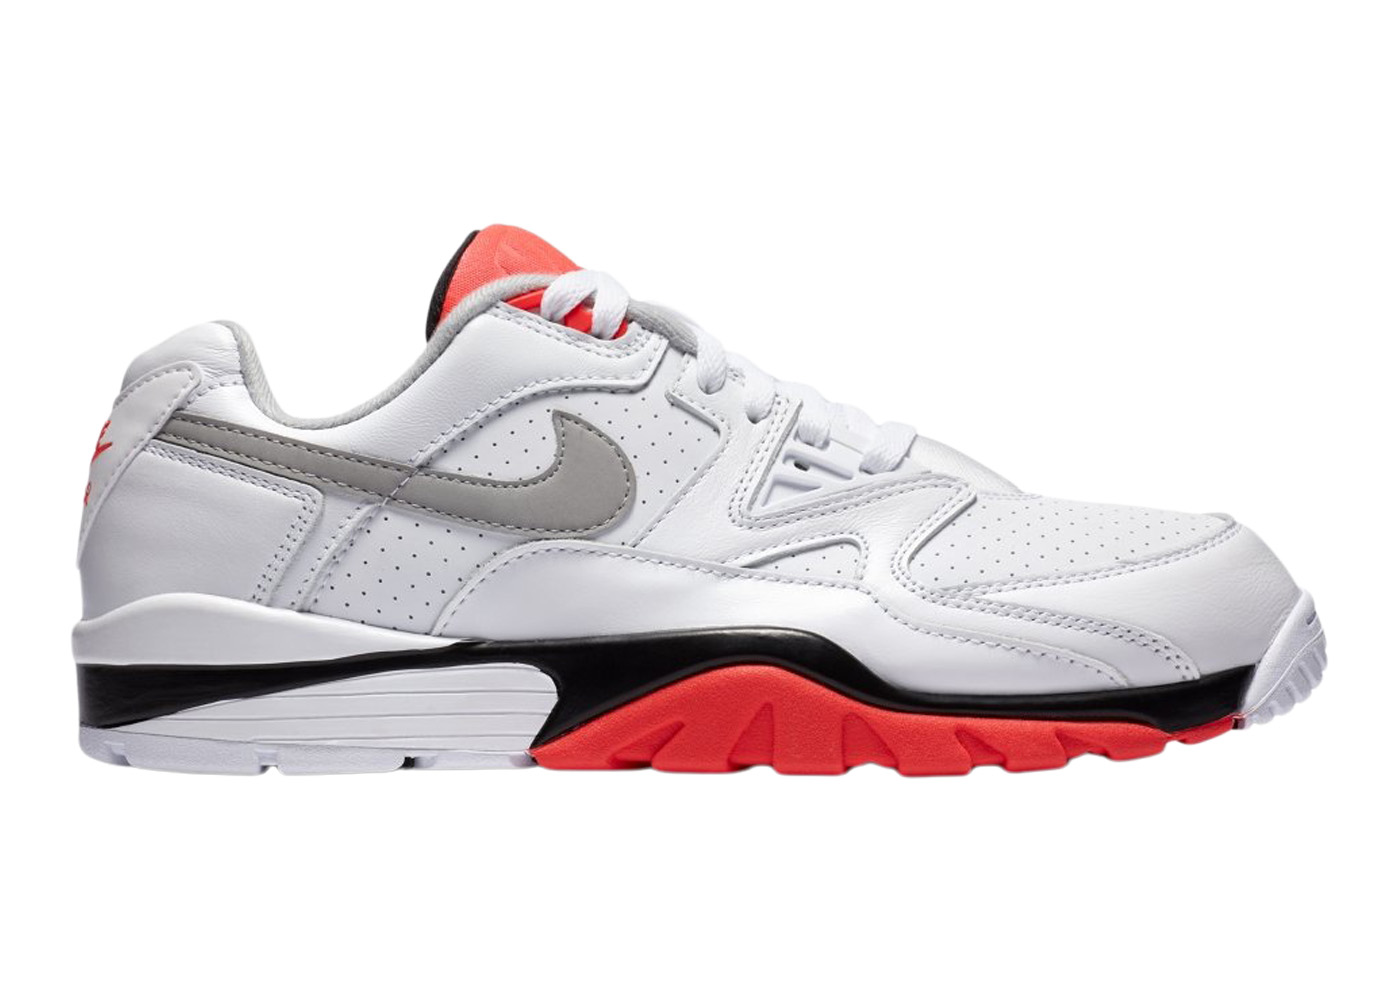 Nike Air Cross Trainer 3 Low Infrared